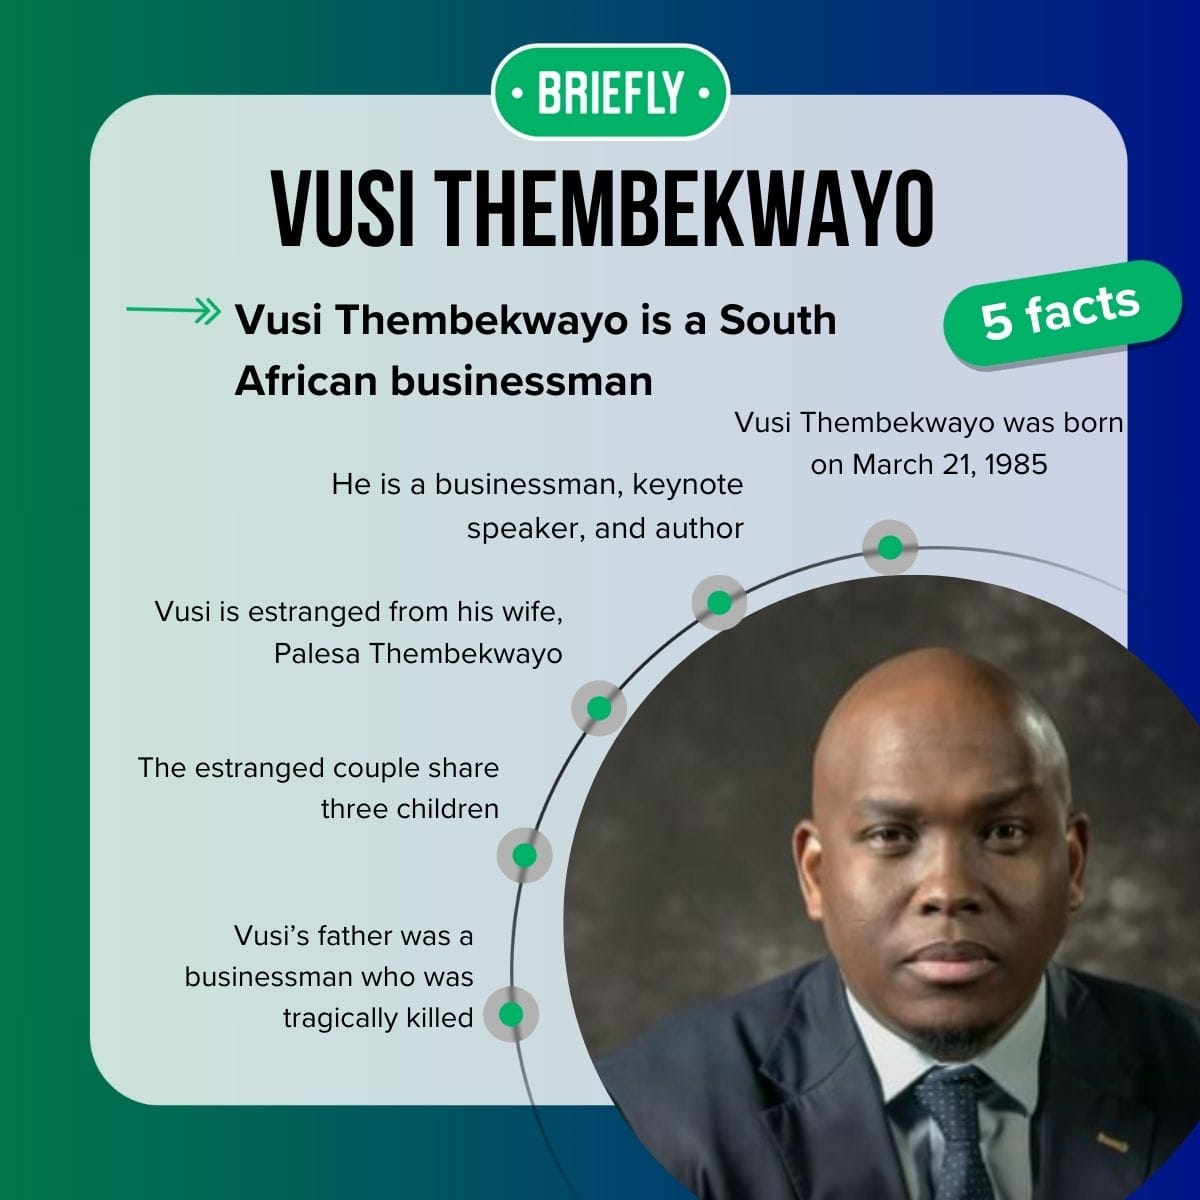 Vusi Thembekwayo's net worth, business ventures and assets